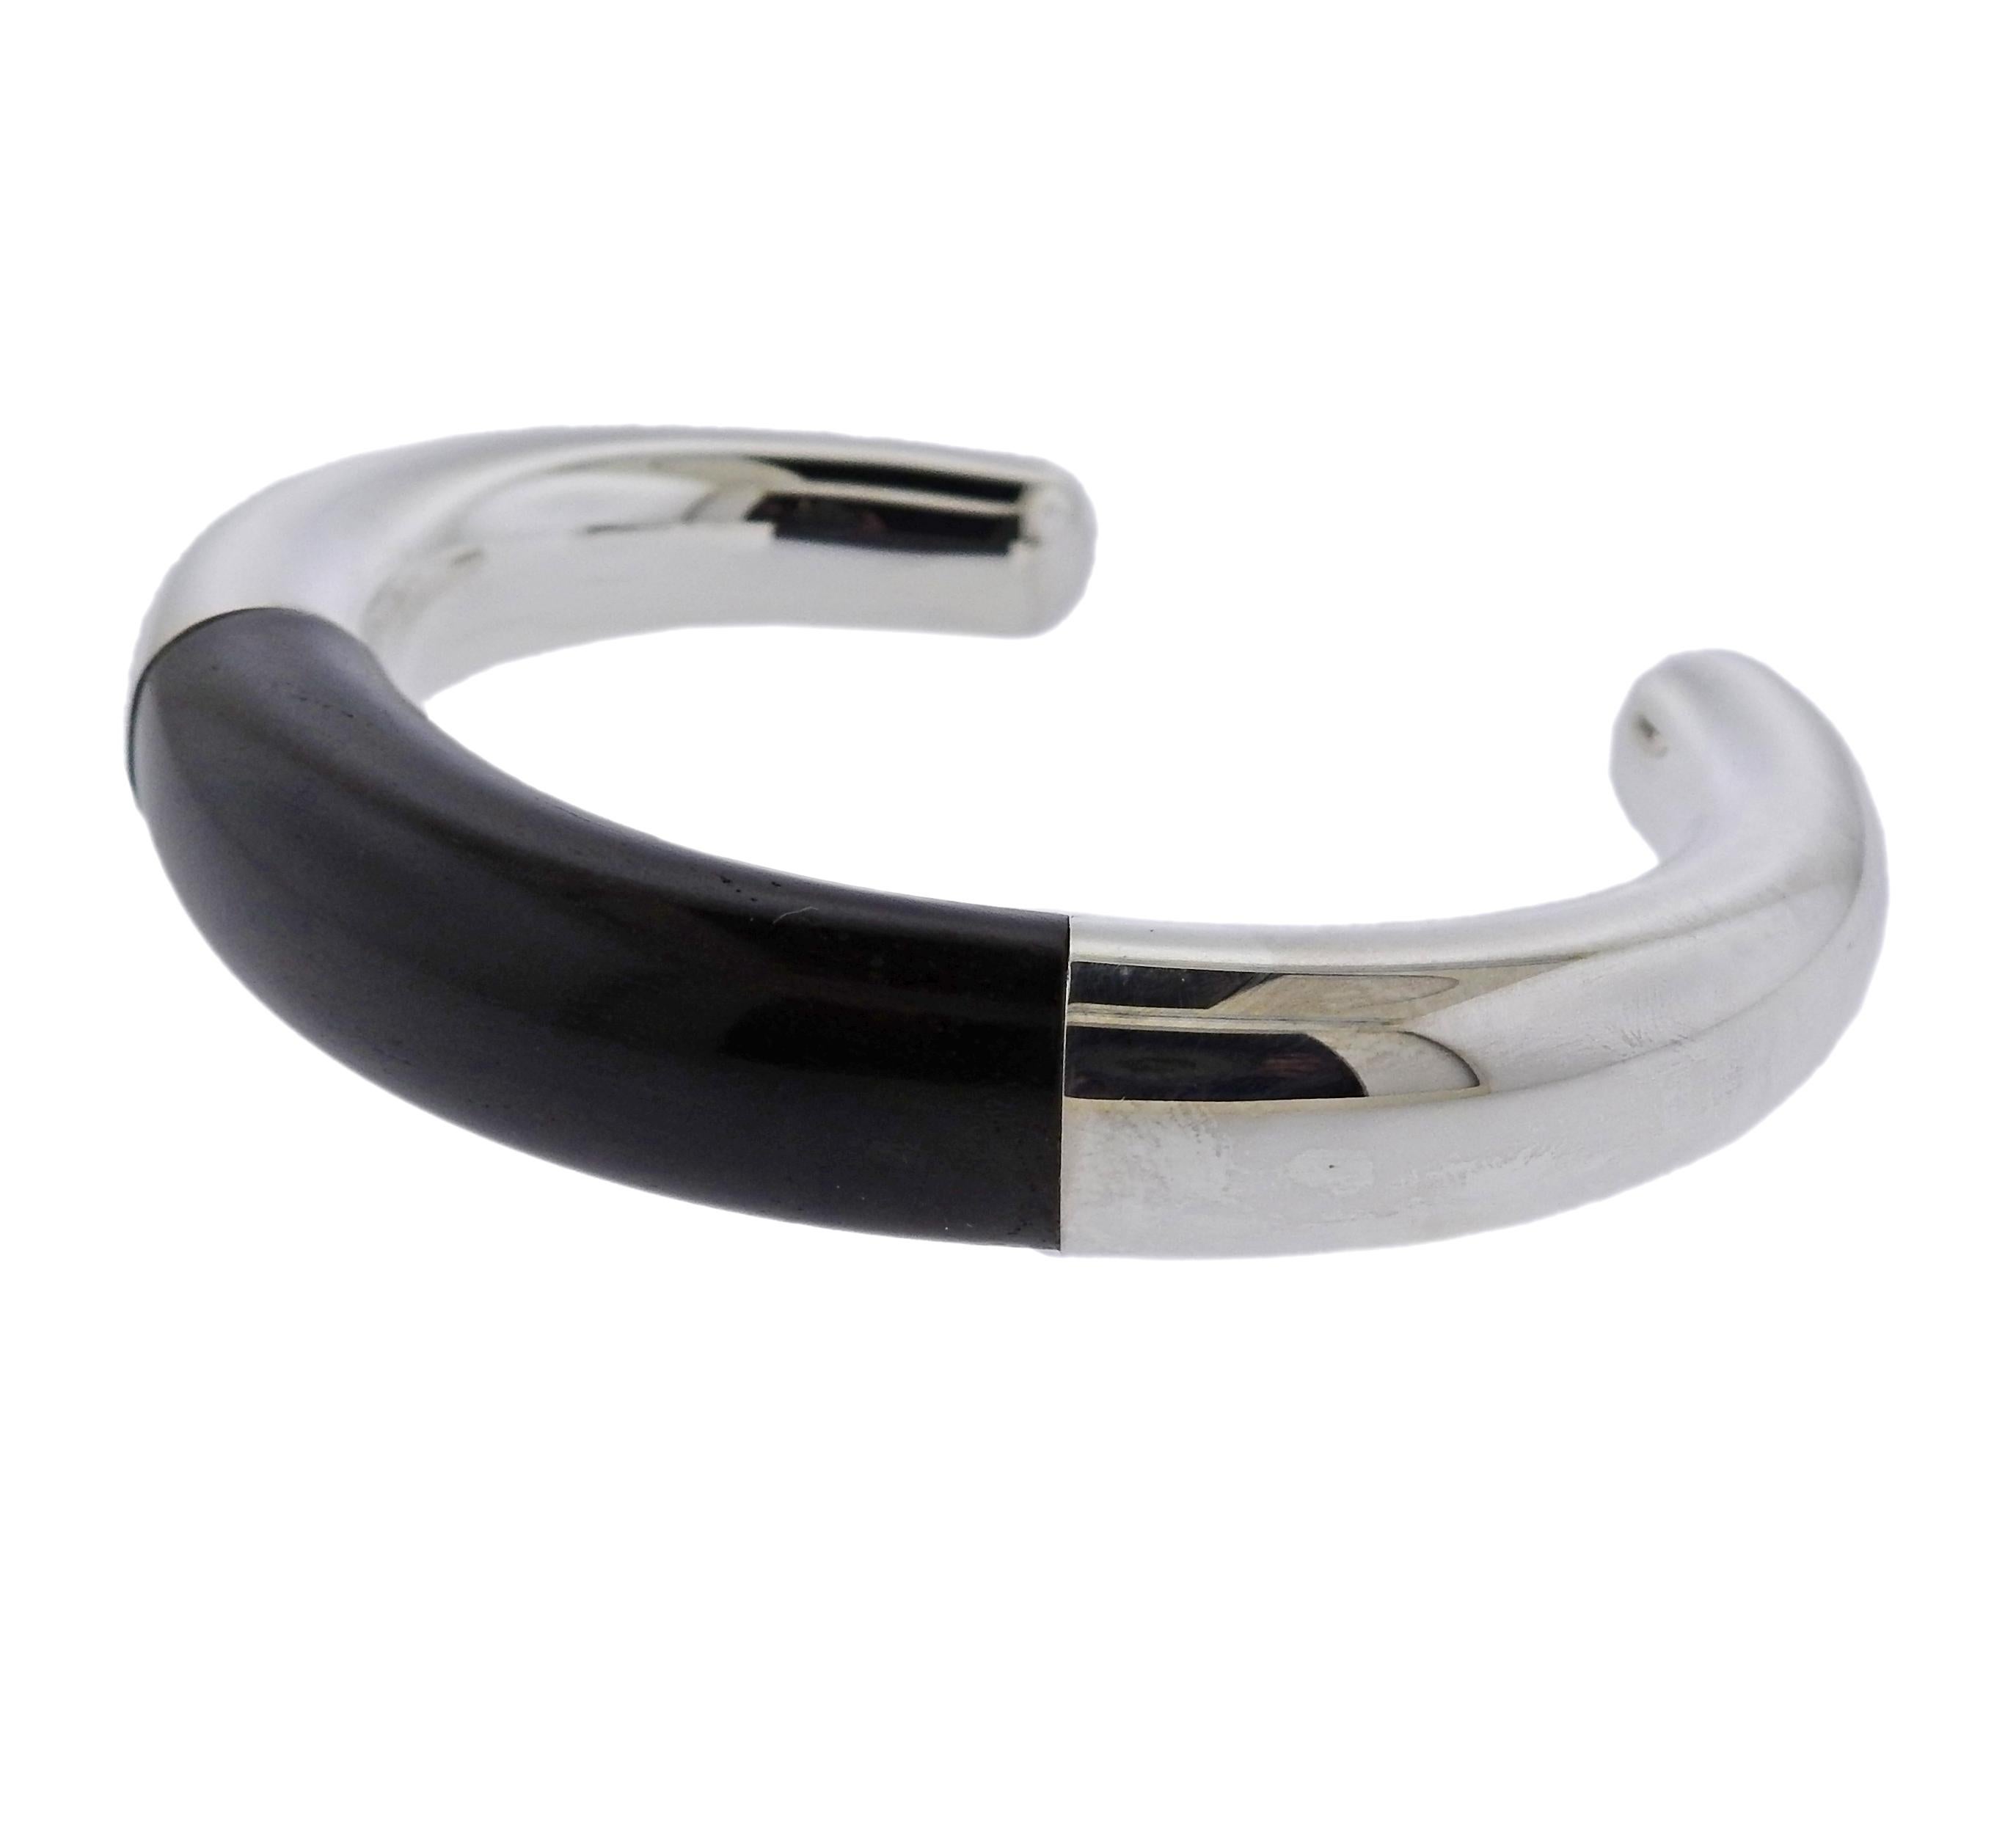 Sterling silver cuff bracelet crafted by Georg Jensen. Brand new with packaging. Bracelet will fit up to 7.25